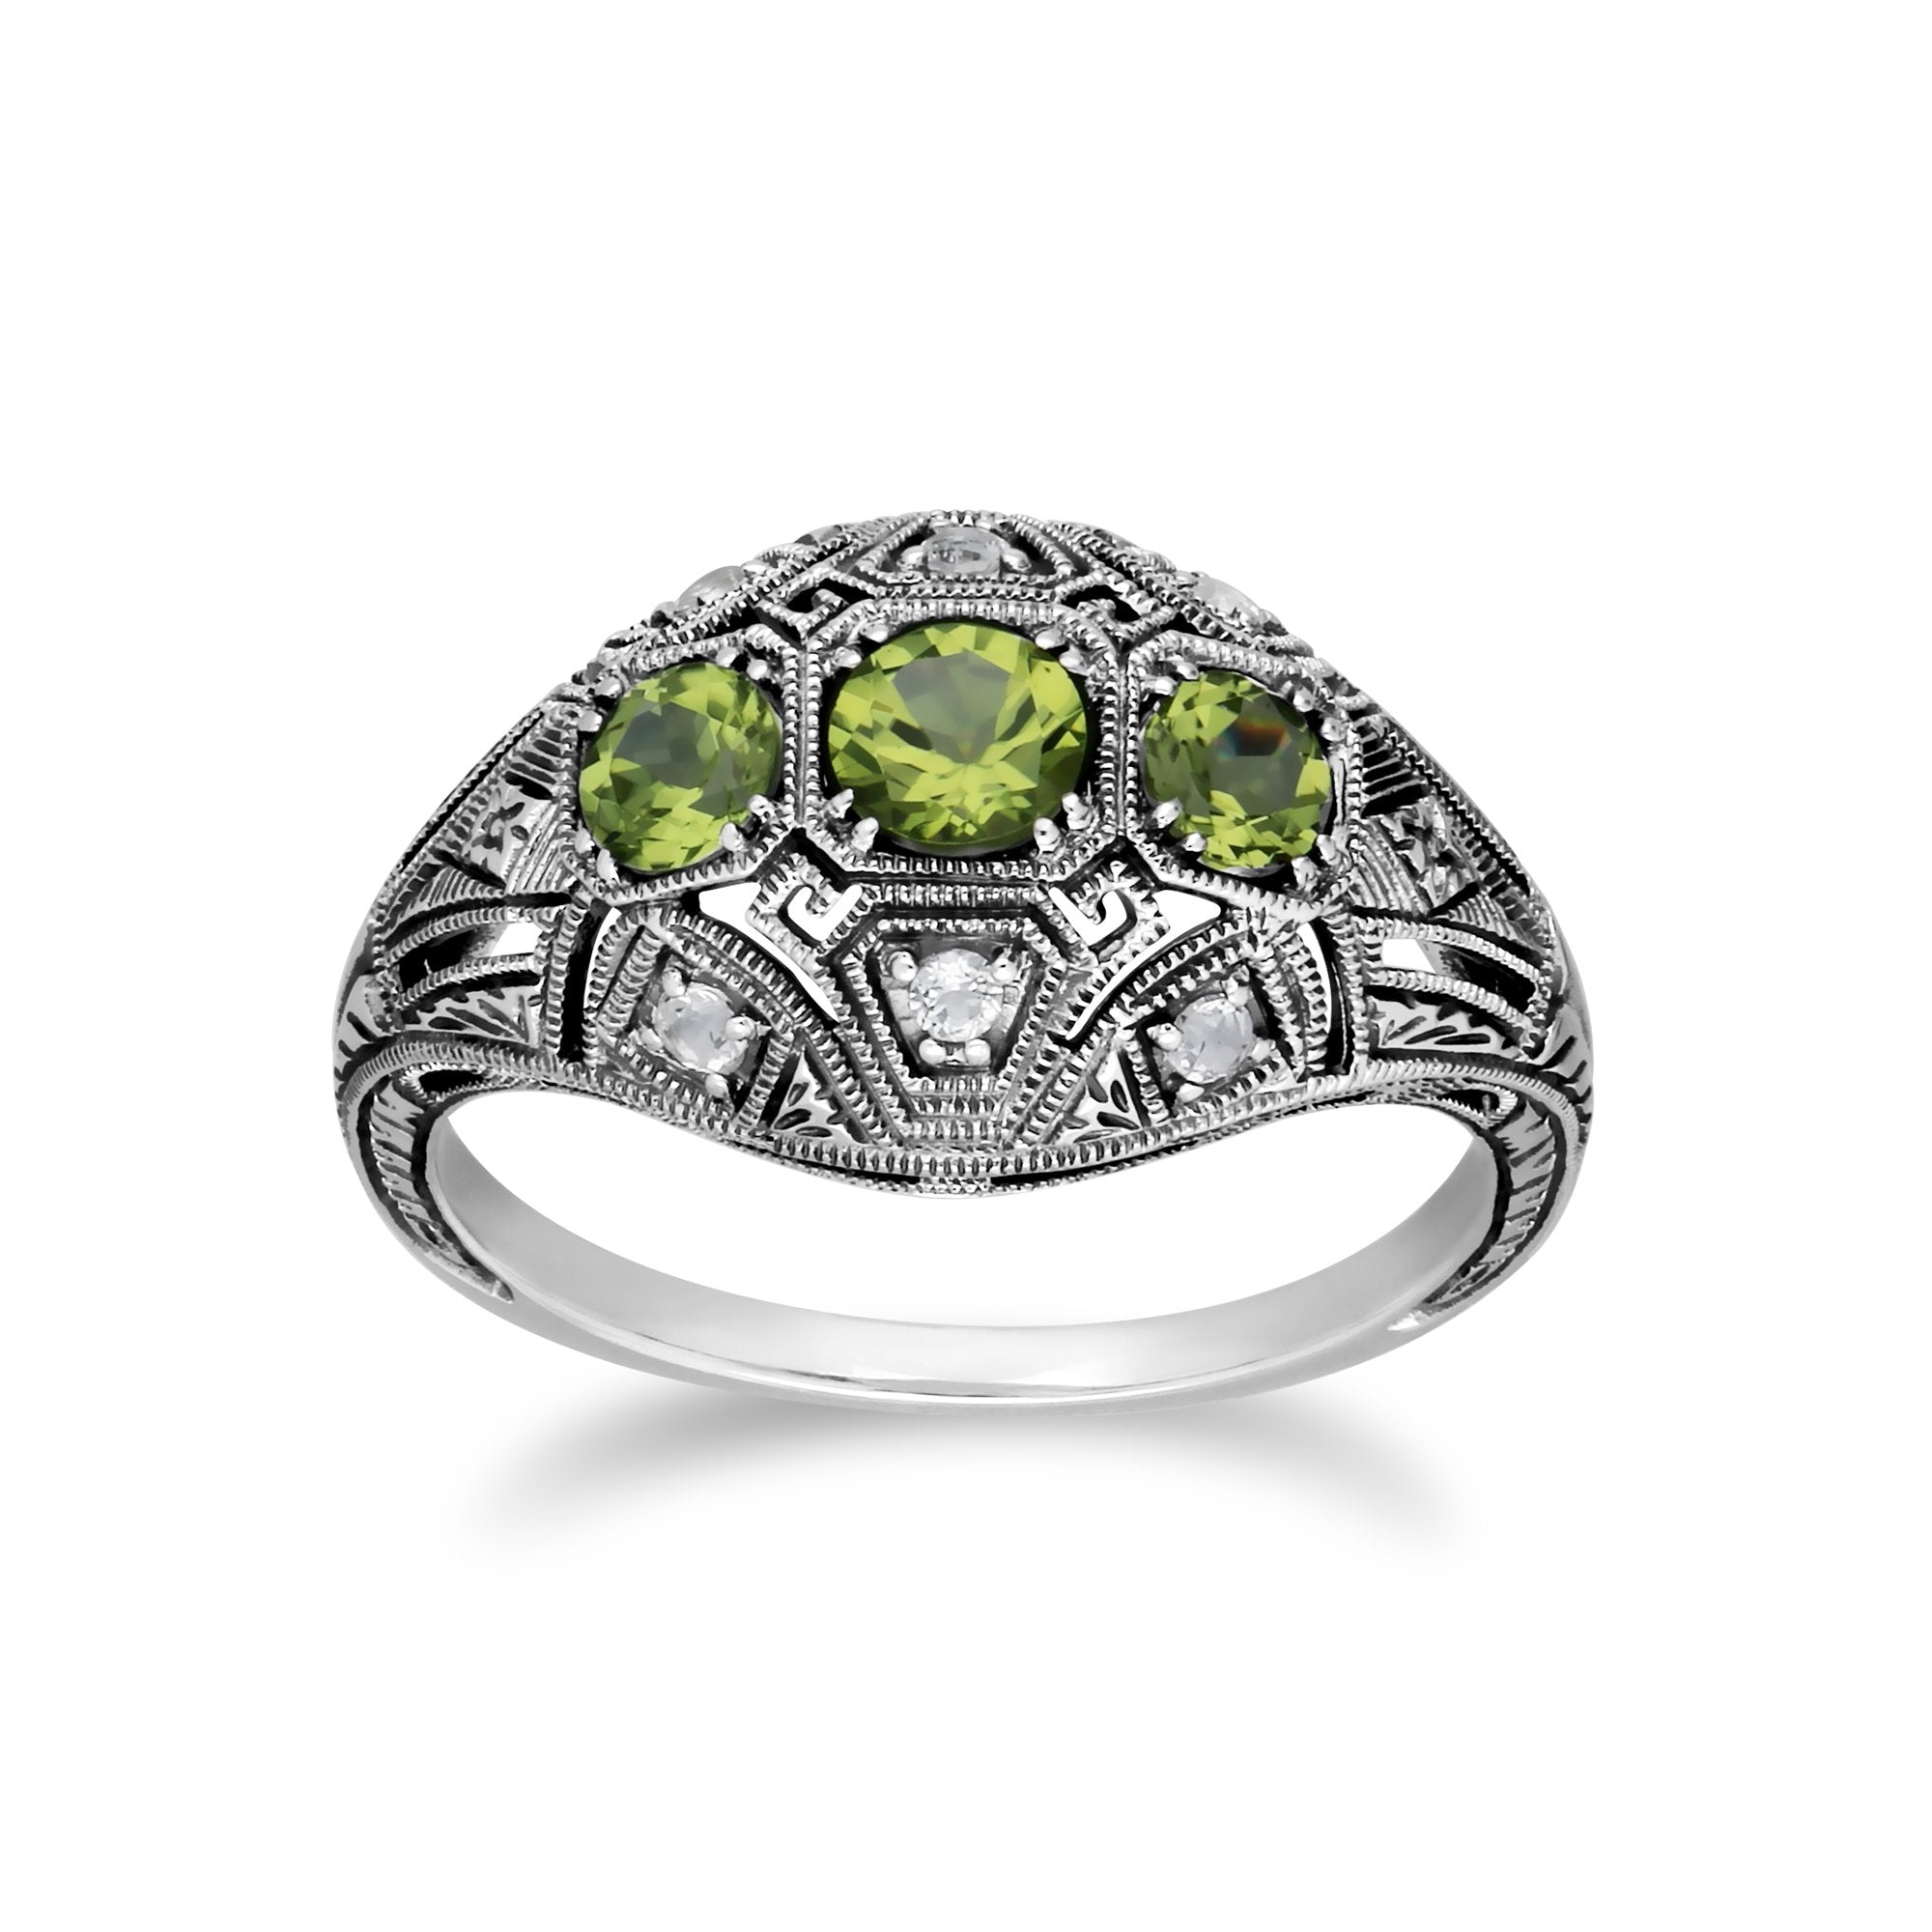 Art Deco Style Round Peridot & White Topaz Three Stone Ring in 925 Sterling Silver